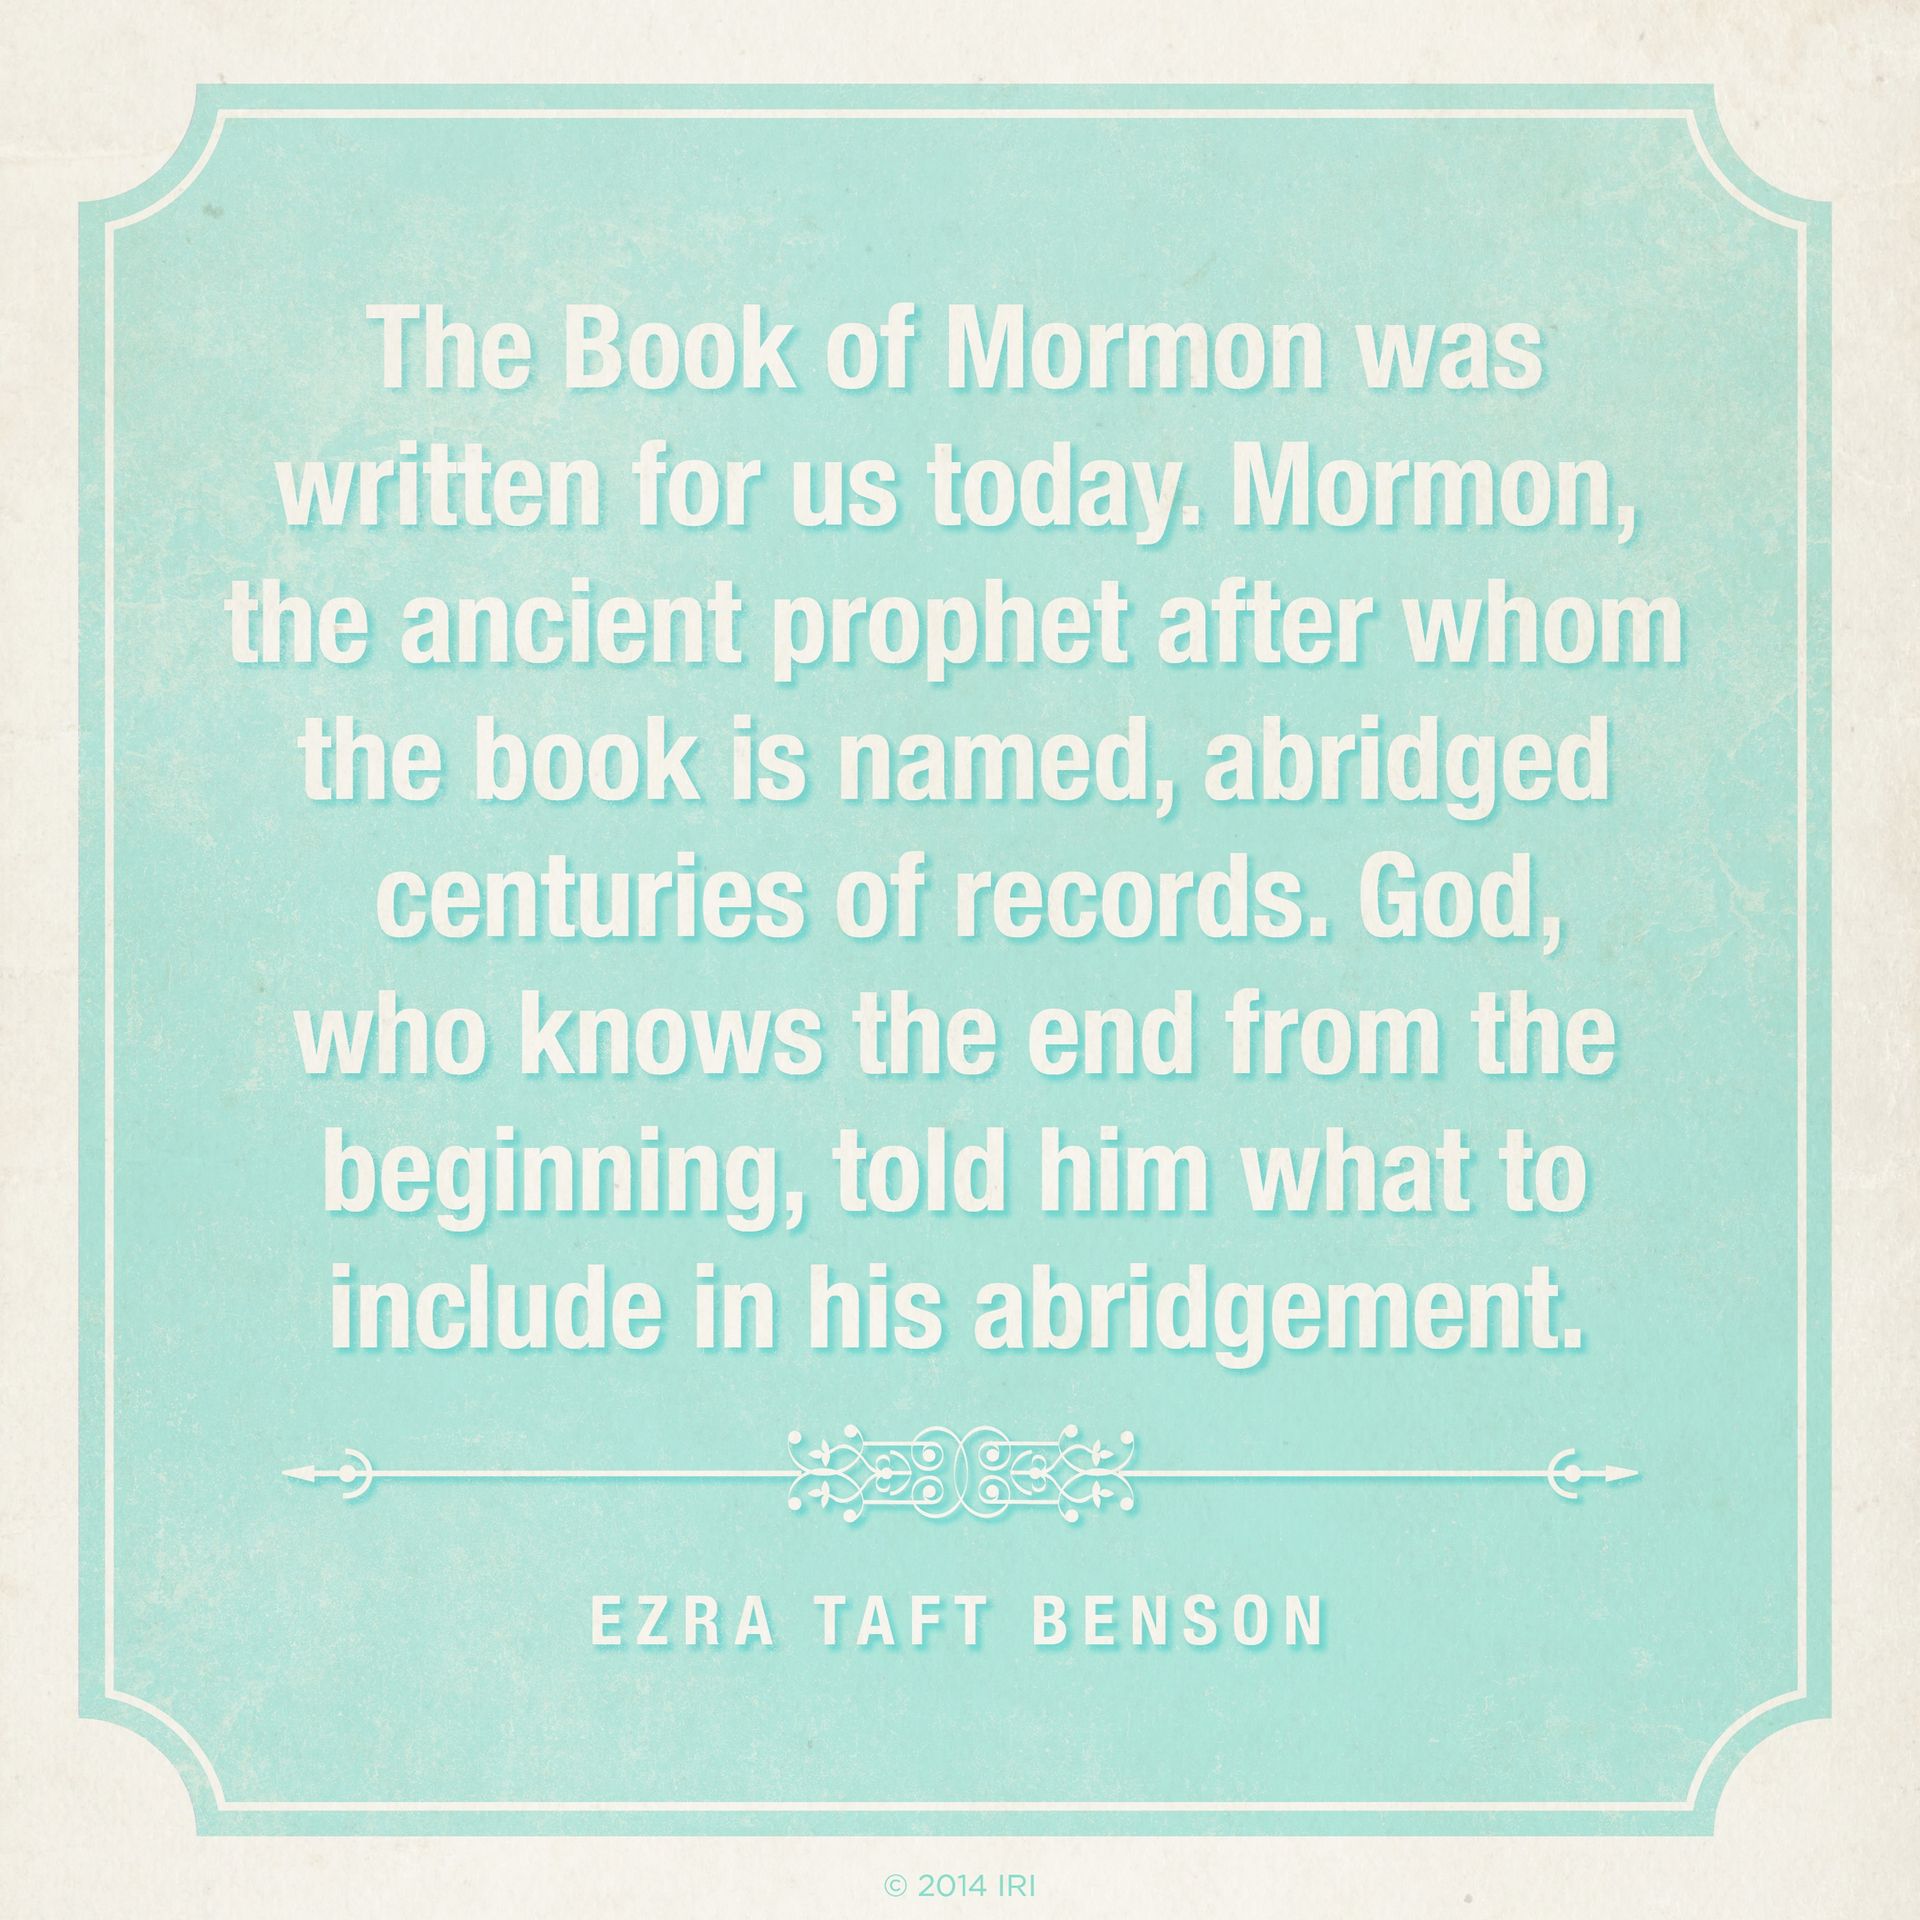 “The Book of Mormon was written for us today. Mormon, the ancient prophet after whom the book is named, abridged centuries of records. God, who knows the end from the beginning, told him what to include in his abridgment.”—President Ezra Taft Benson, “The Book of Mormon Is the Word of God”